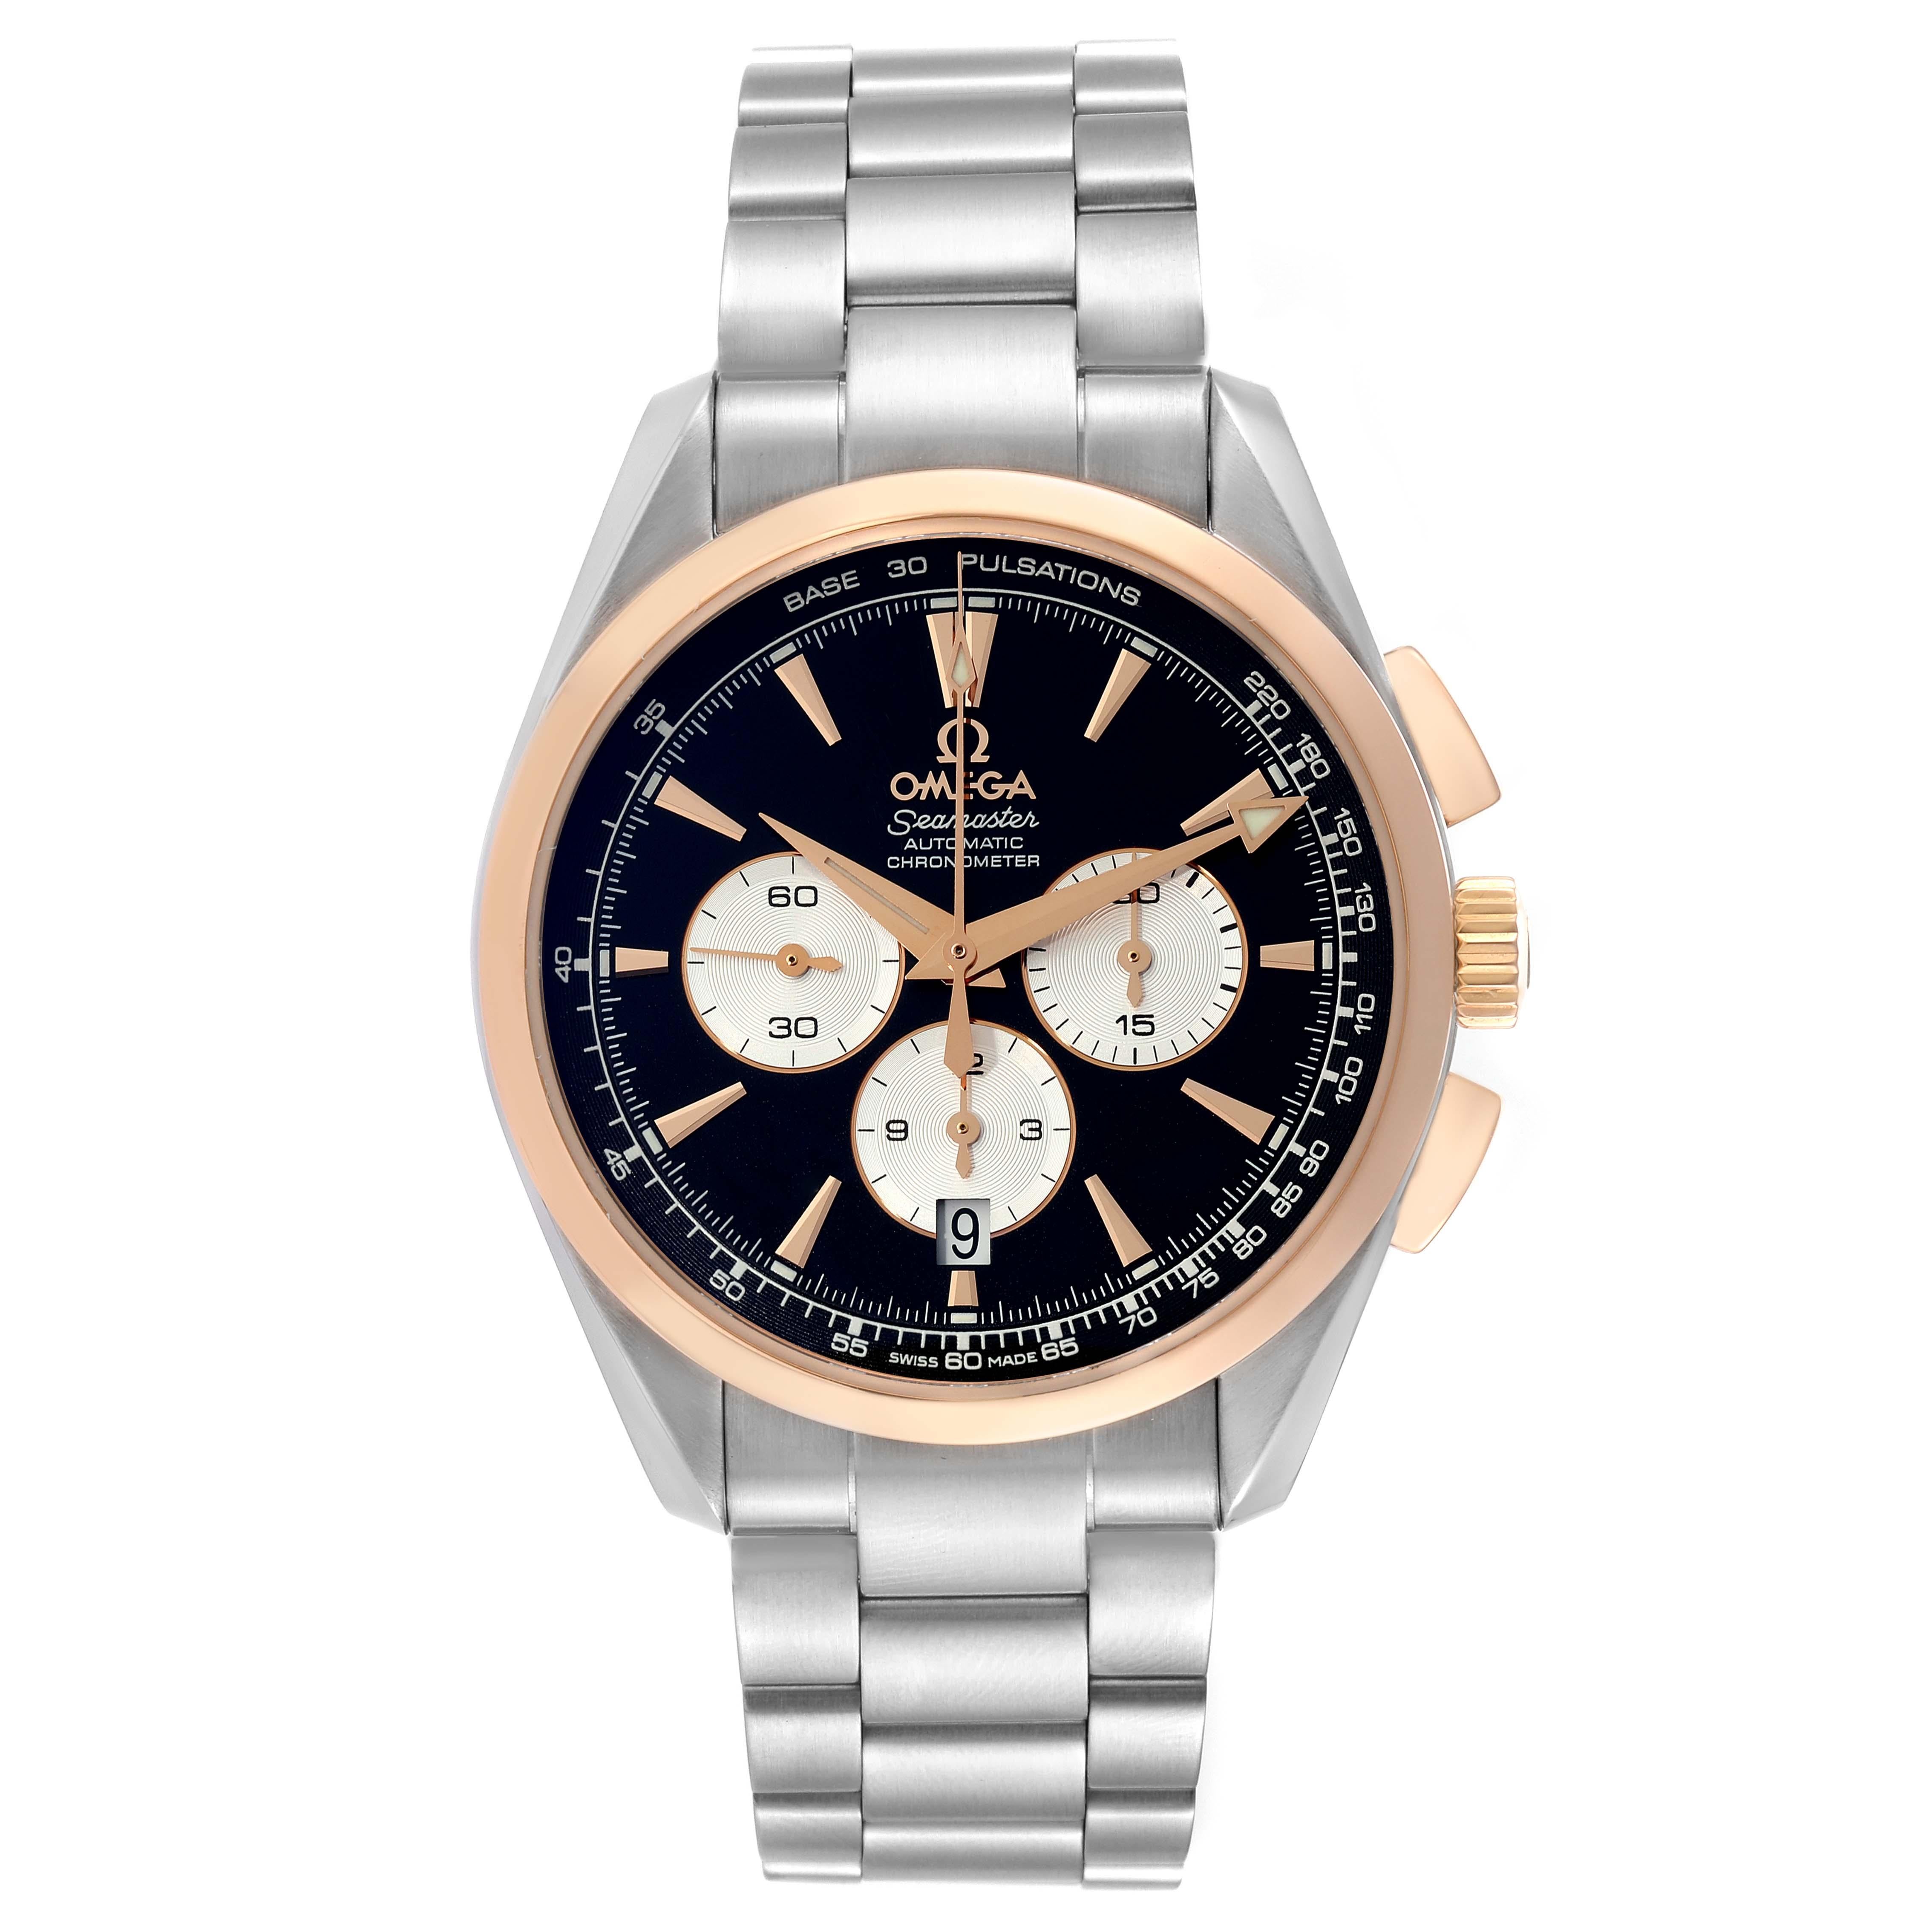 Omega Seamaster Steel Rose Gold Mens Watch 221.20.42.40.01.002 Box Card. Automatic self-winding movement with Co-Axial Escapement. Stainless steel and 18K rose gold round case 42 mm in diameter. Omega logo on 18k rose gold crown. 18K rose gold